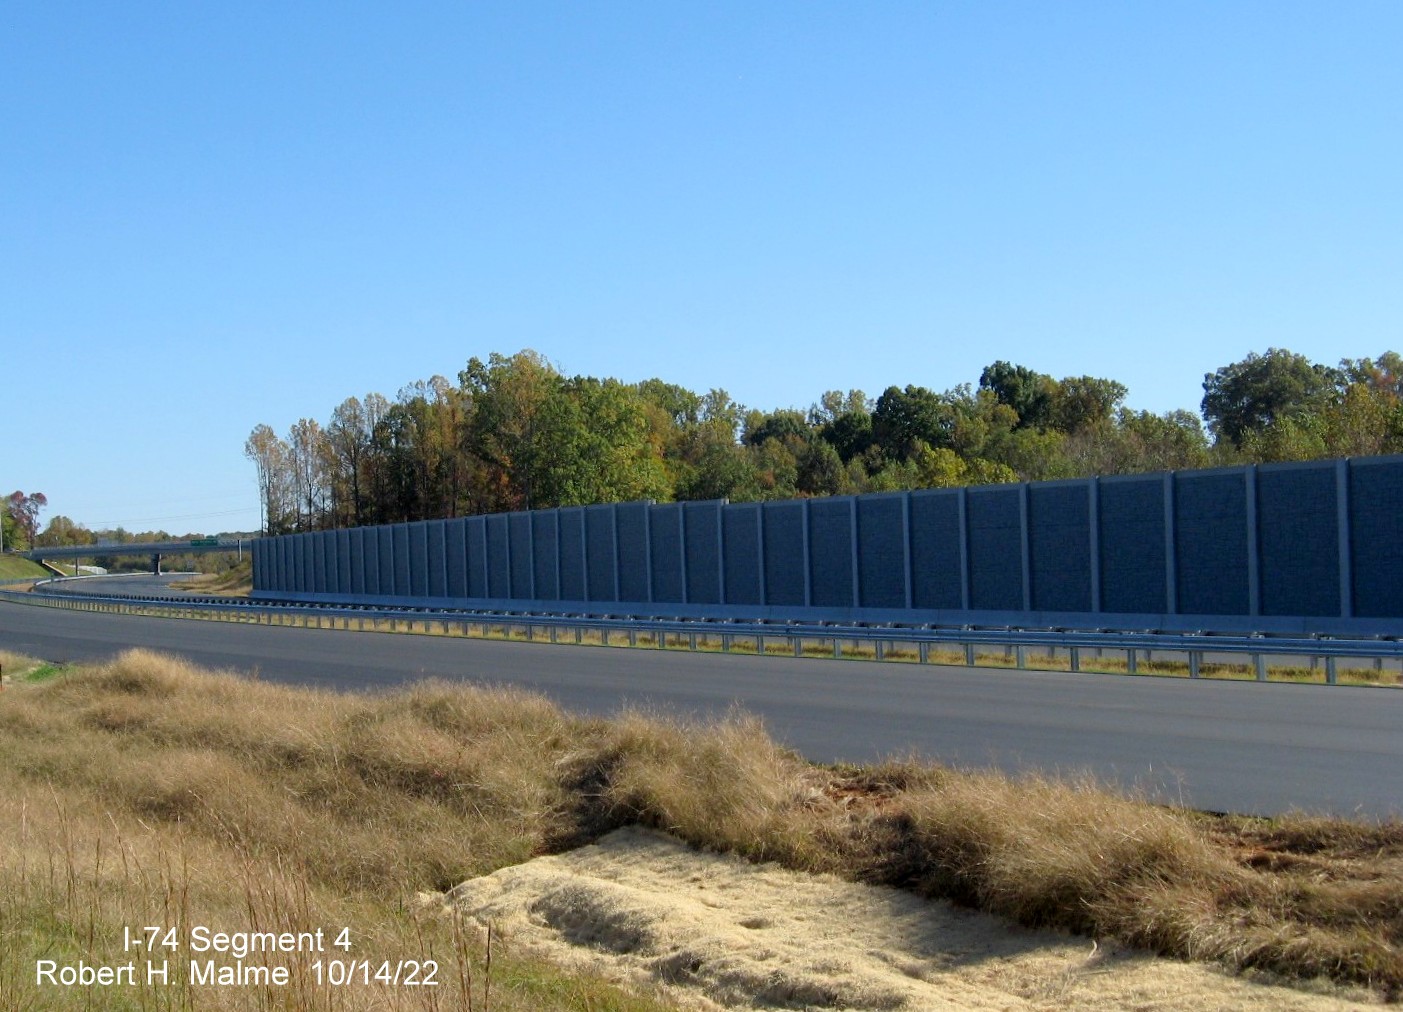 Image of noise wall placed along Future NC 74 (I-74) East near future NC 8/Germanton Road exit 
                                             in Winston-Salem, October 2022